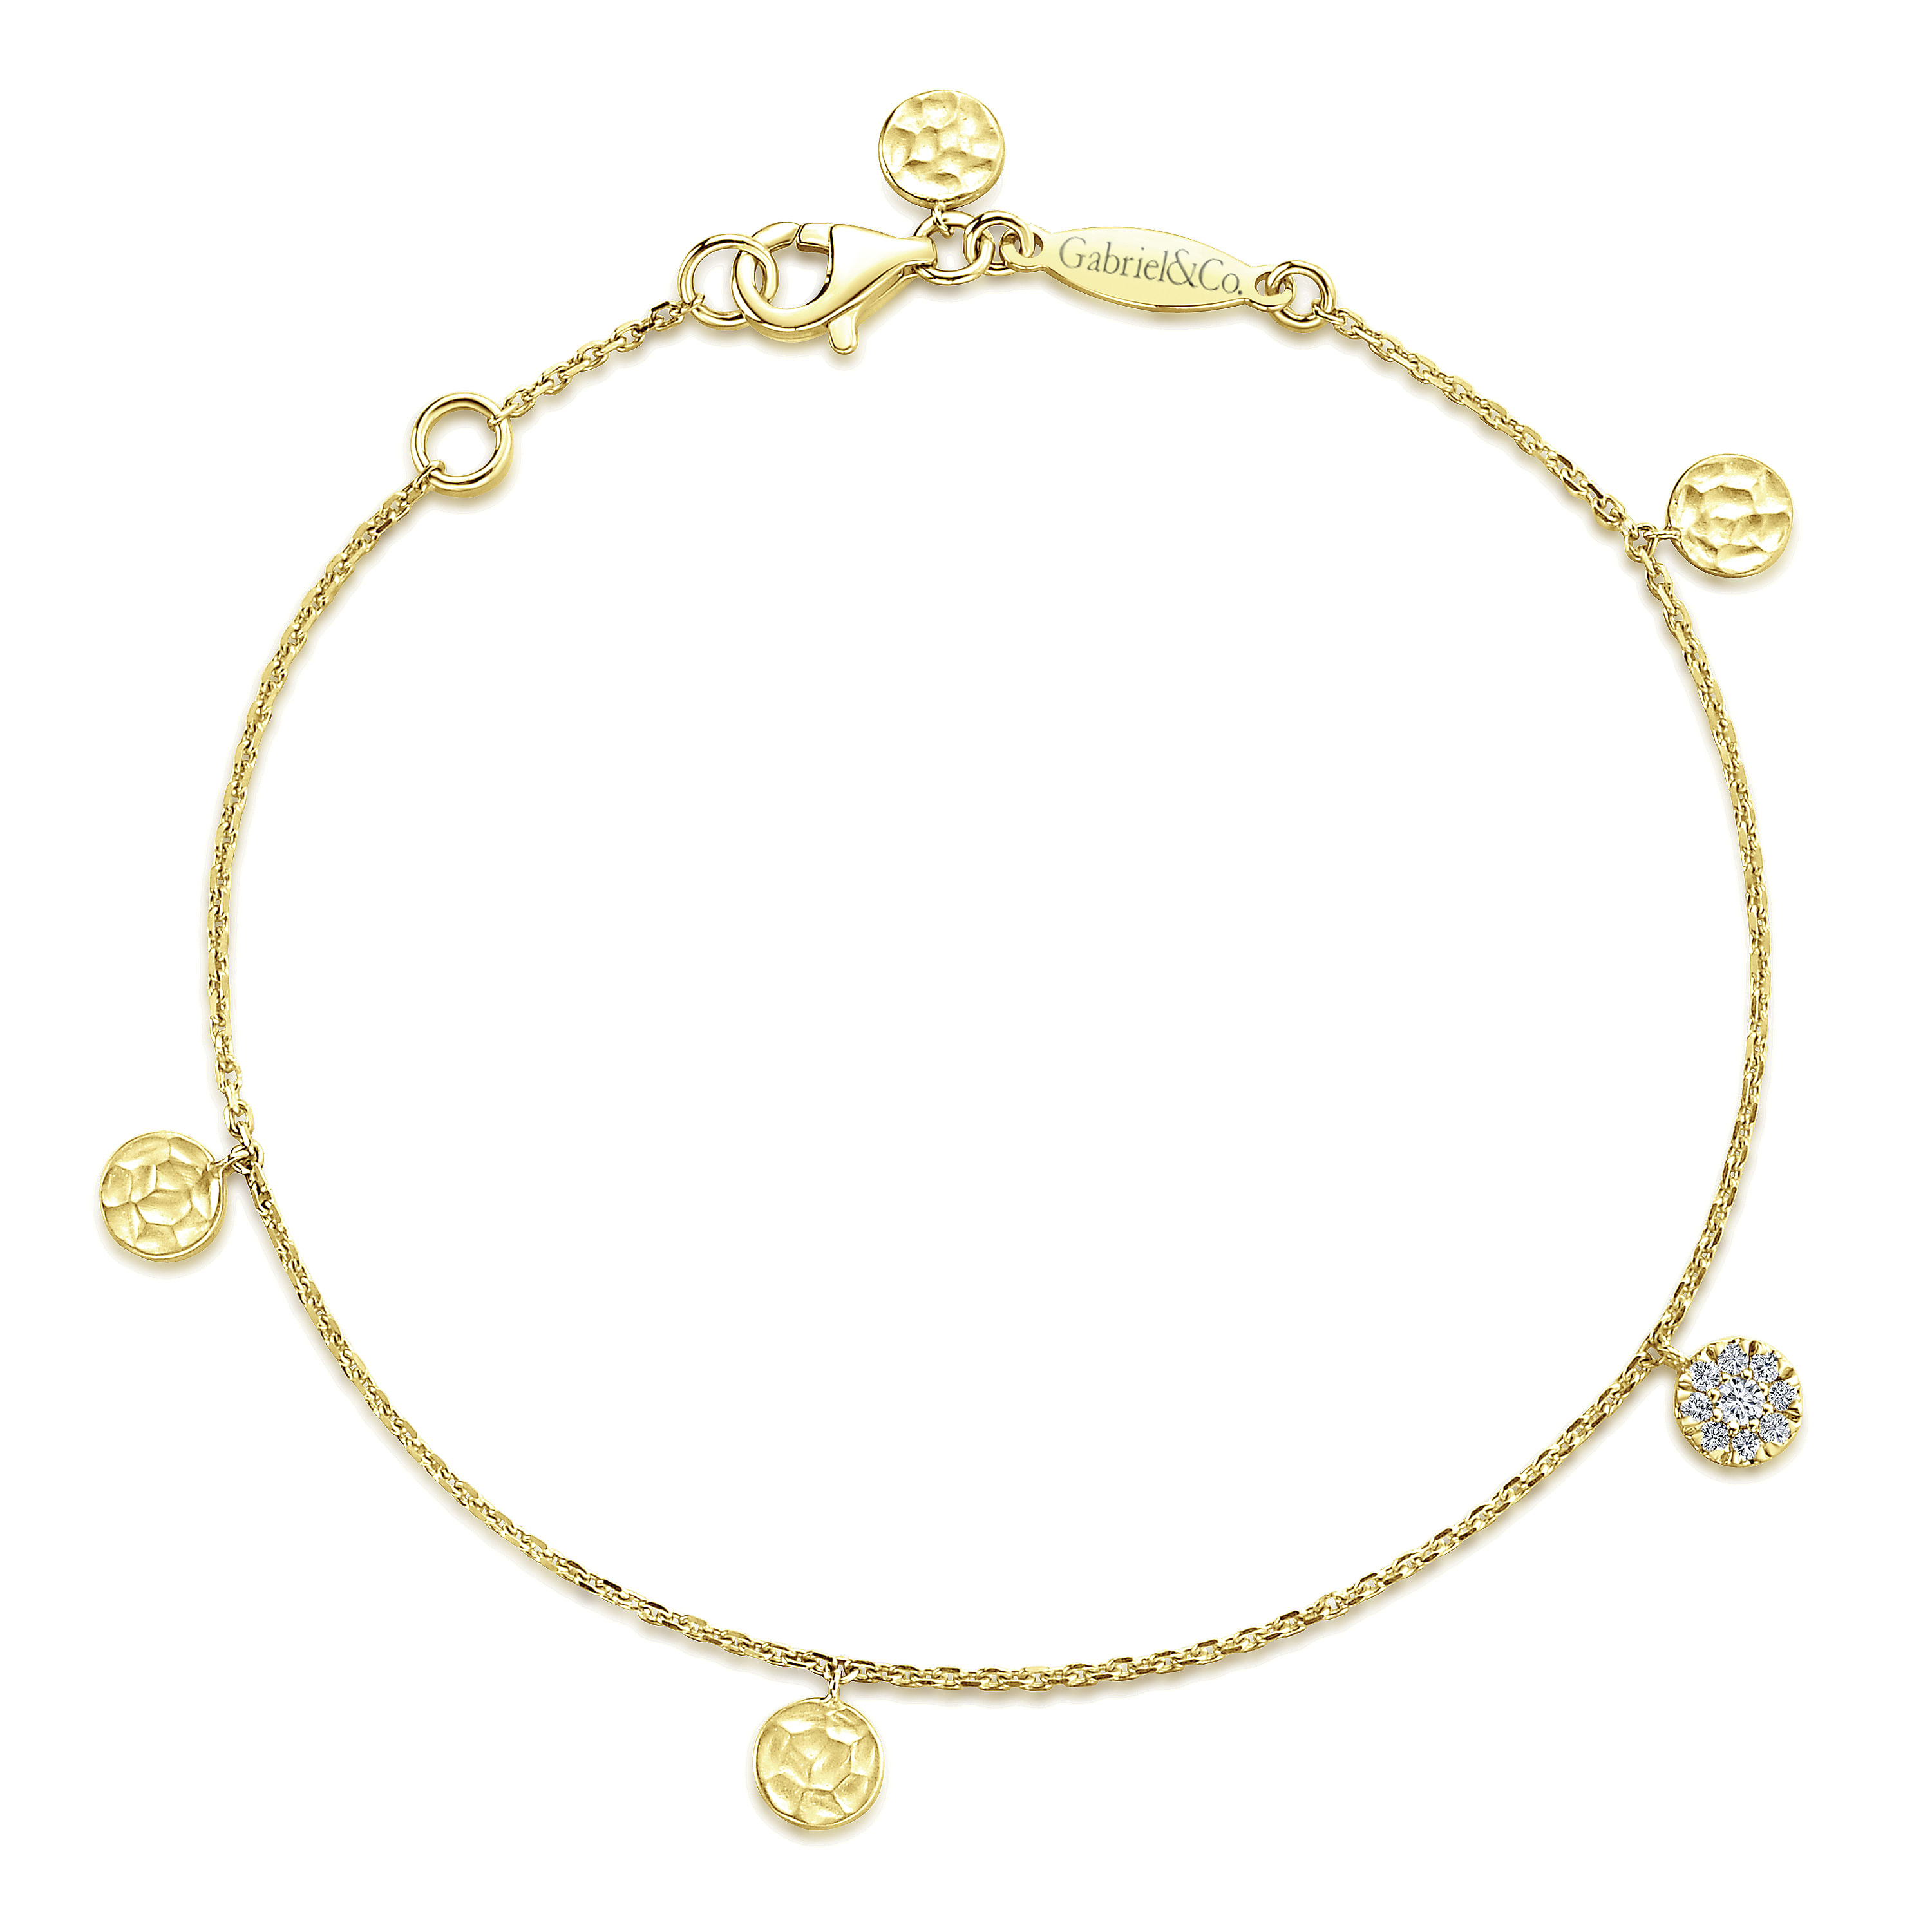 14K Yellow Gold Chain Bracelet with Hammered and Pave Diamond Discs